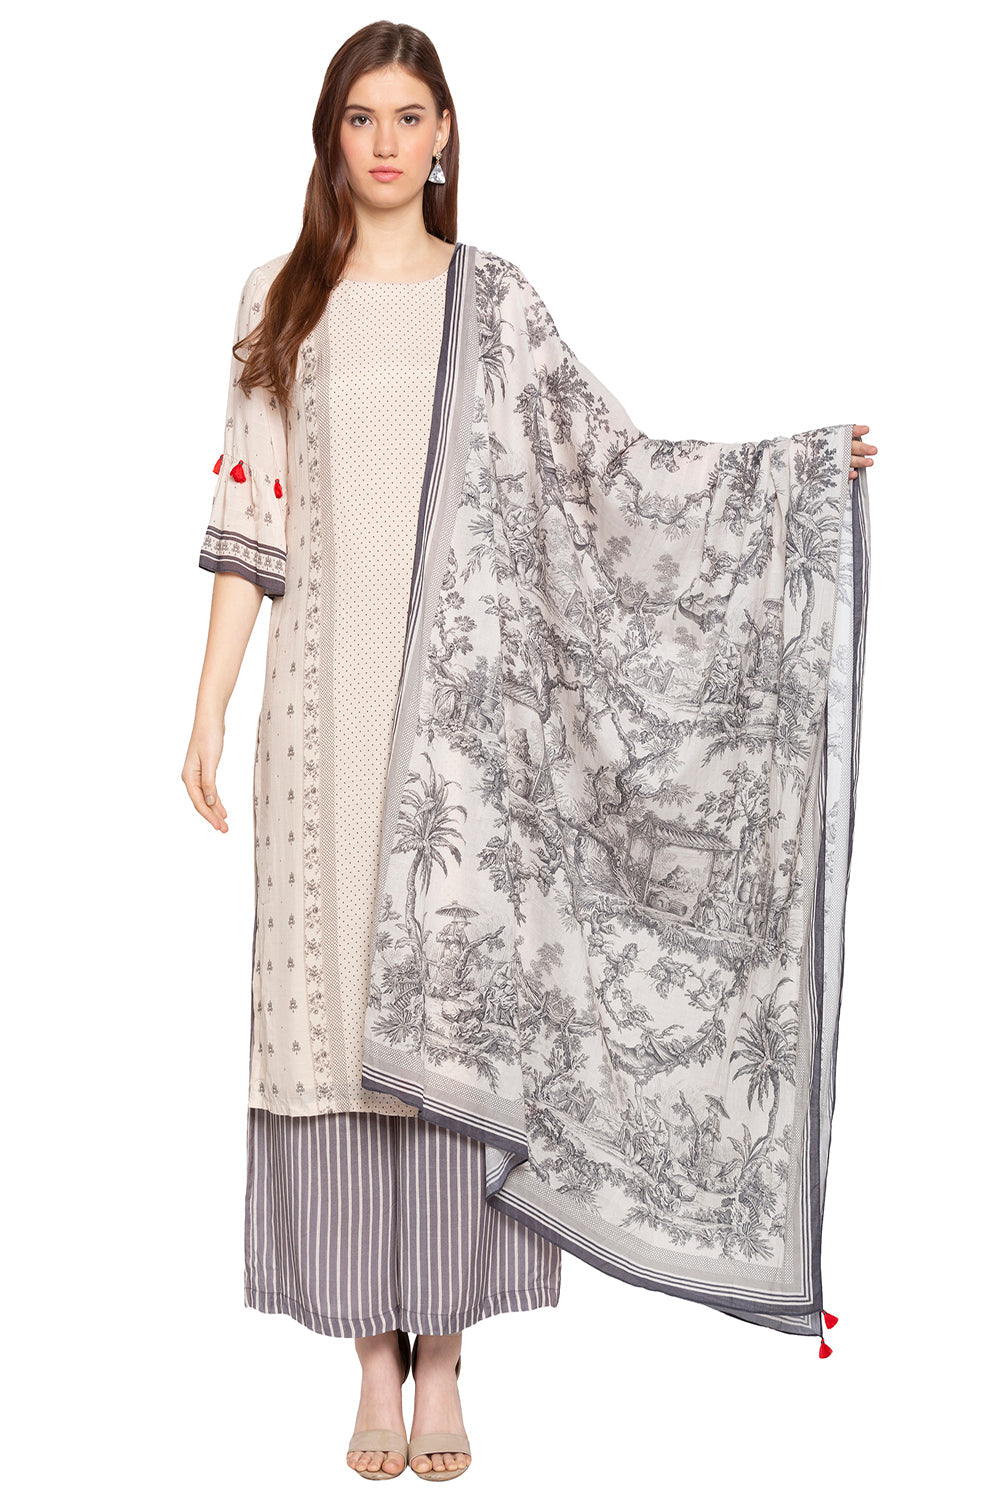 French Toile Printed Kurta With Pants And Dupatta